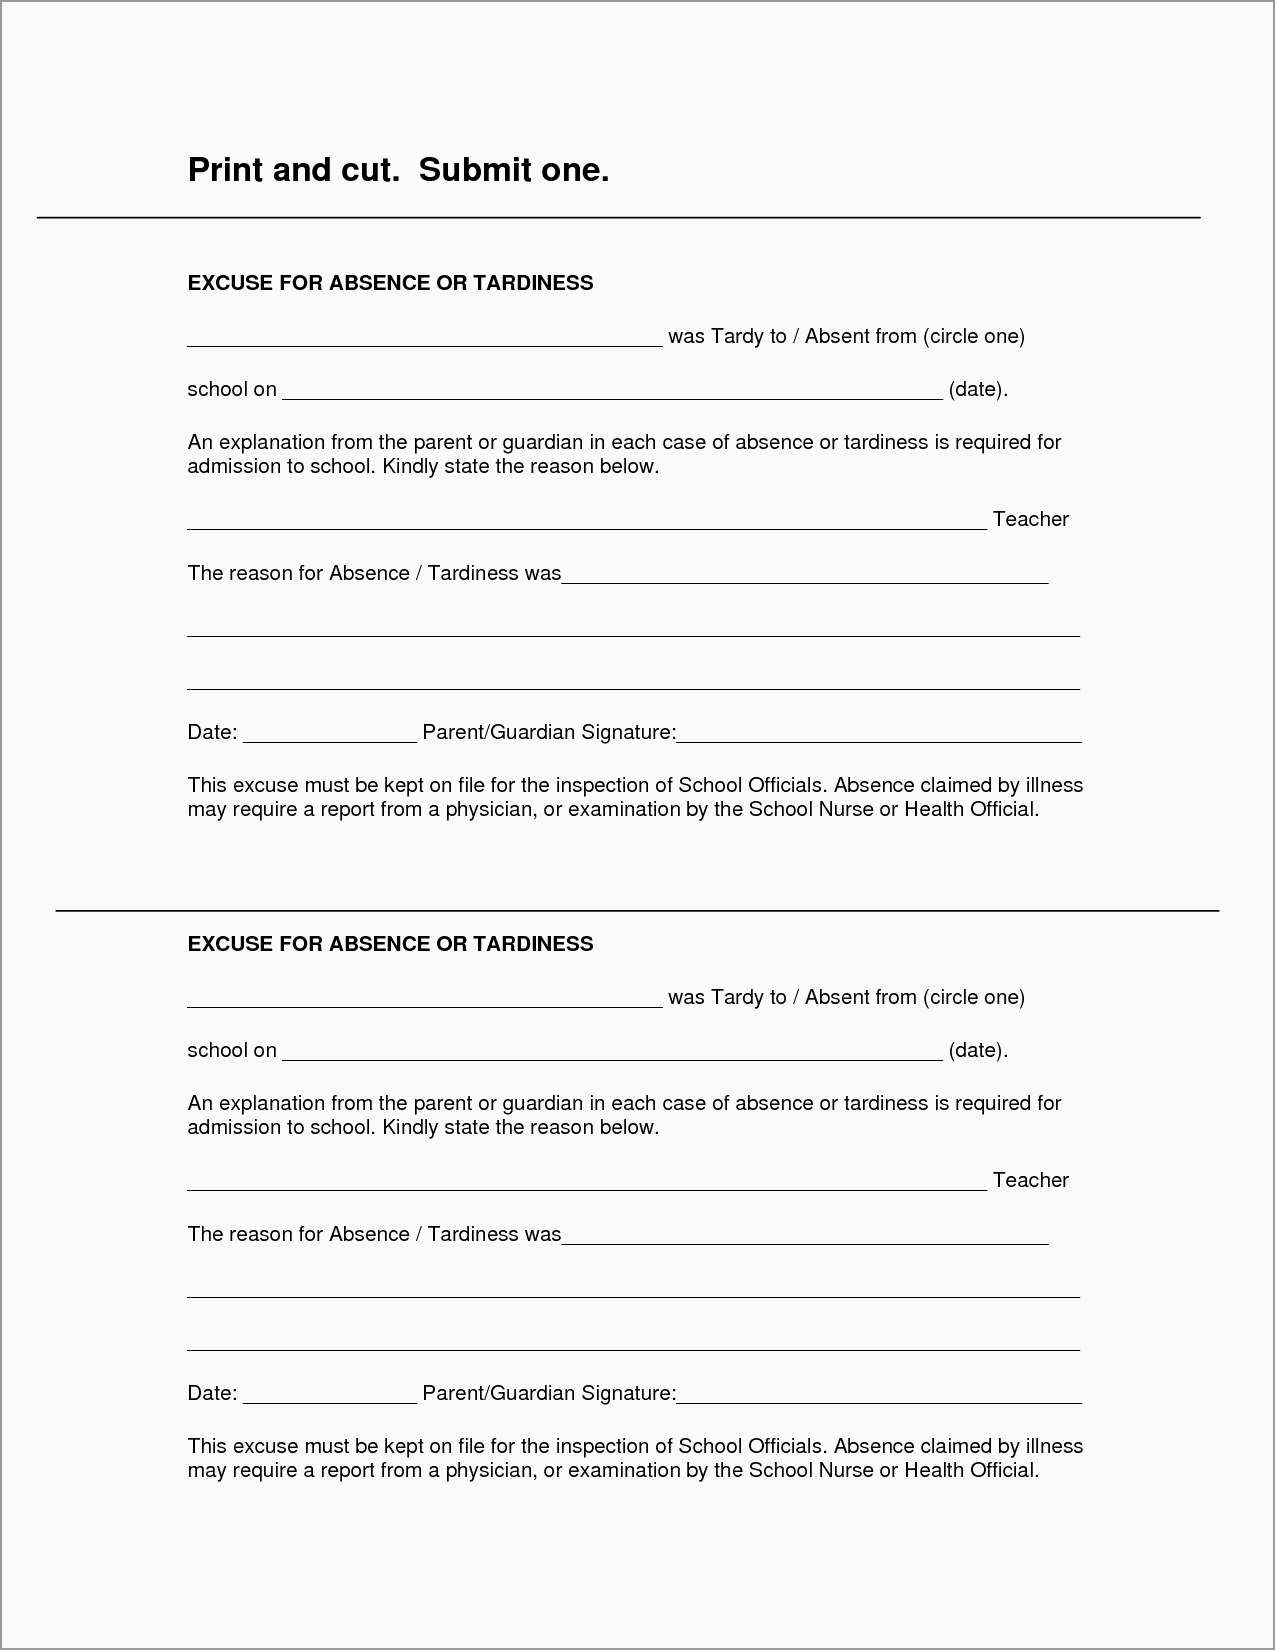 Free Printable Doctors Notes Templates Best Free Printable Doctors - Free Printable Doctors Excuse For School